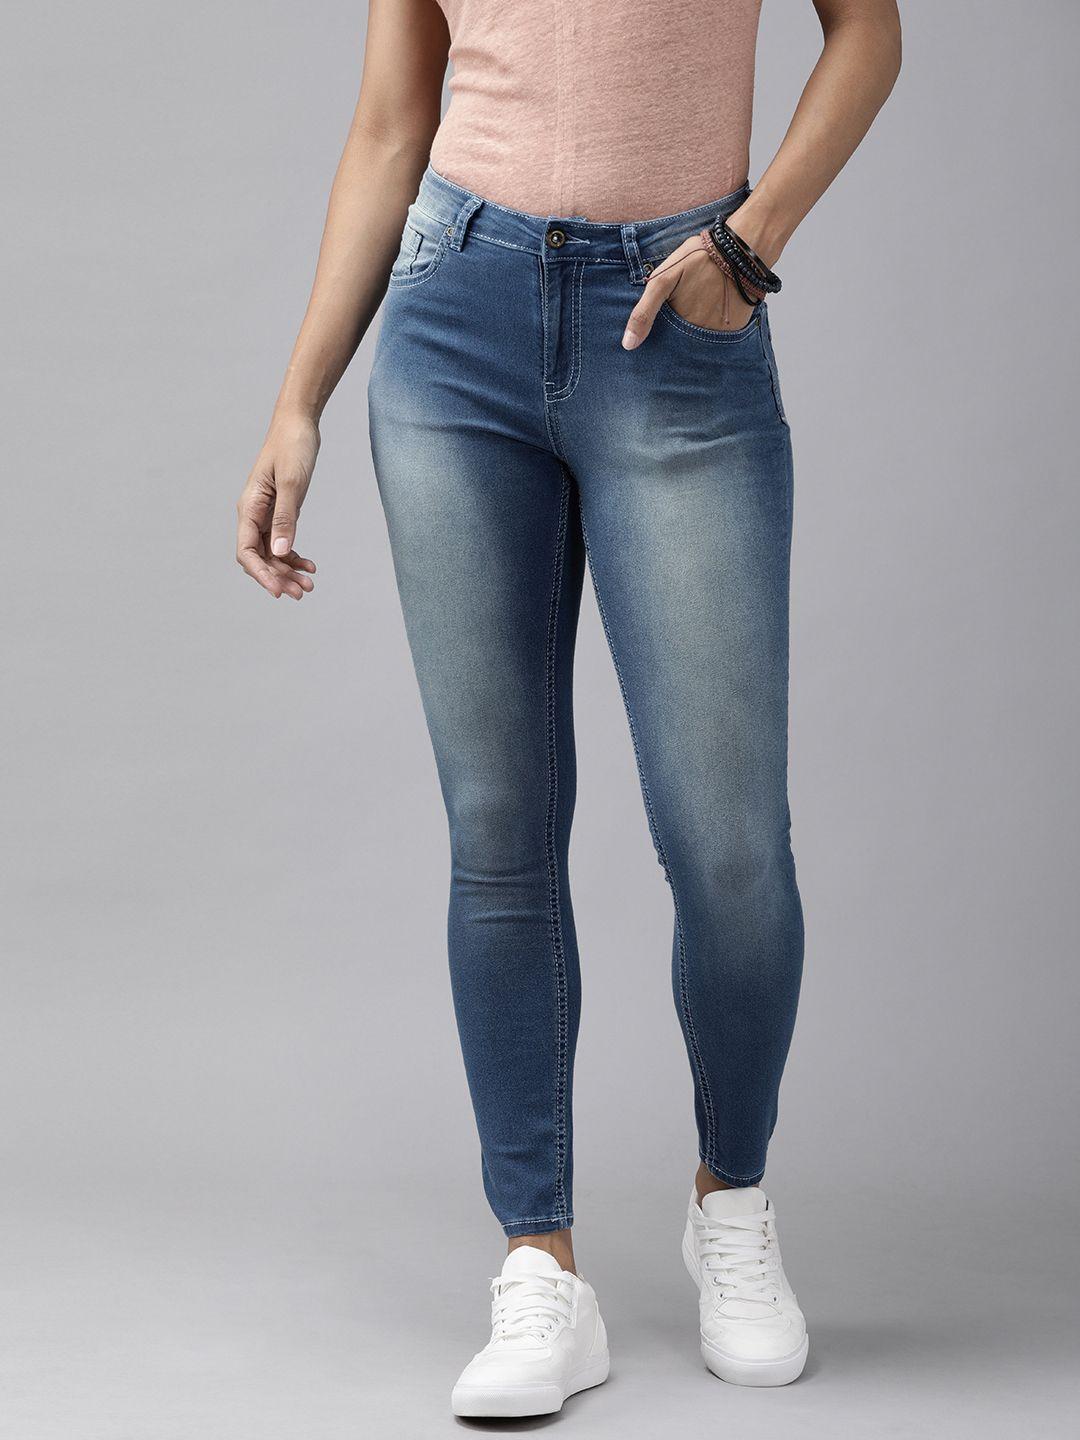 roadster-women-blue-skinny-fit-high-rise-clean-look-stretchable-cropped-jeans